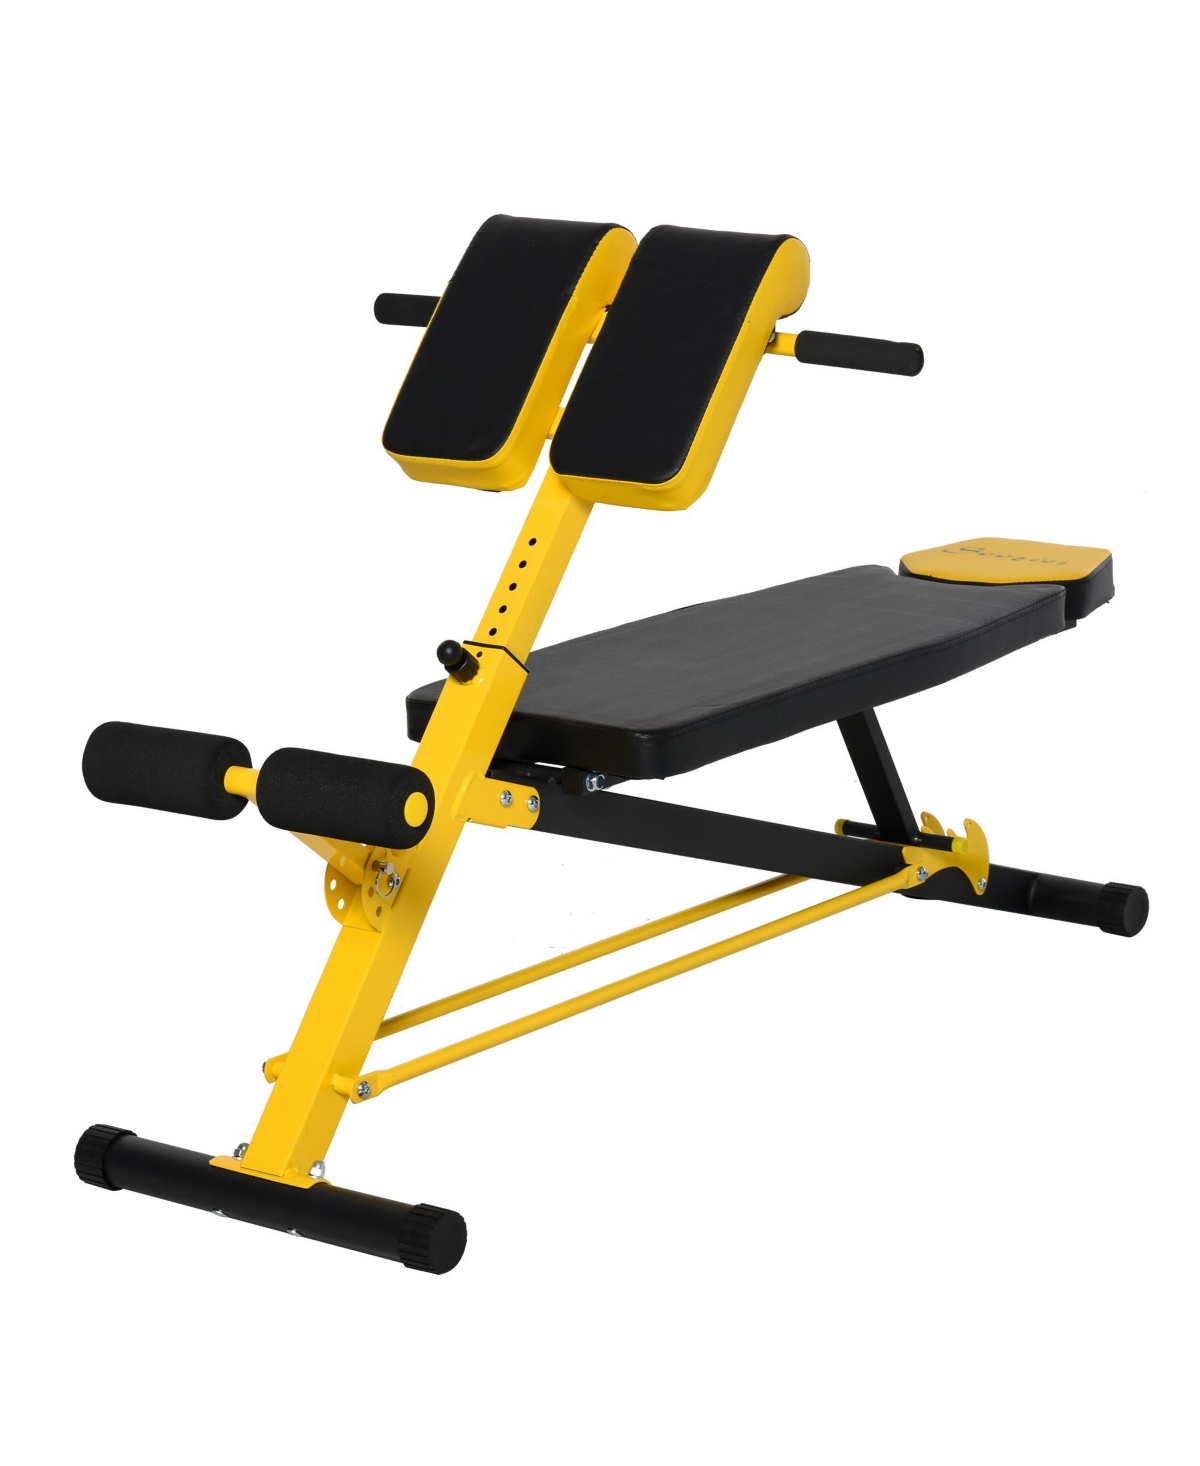 Adjustable Hyper Extension Dumbbell Weight Bench, Foam Leg Holders, Exercise Abs, Arms, Core, Strength Workout Station for Home Gym, Yellow -